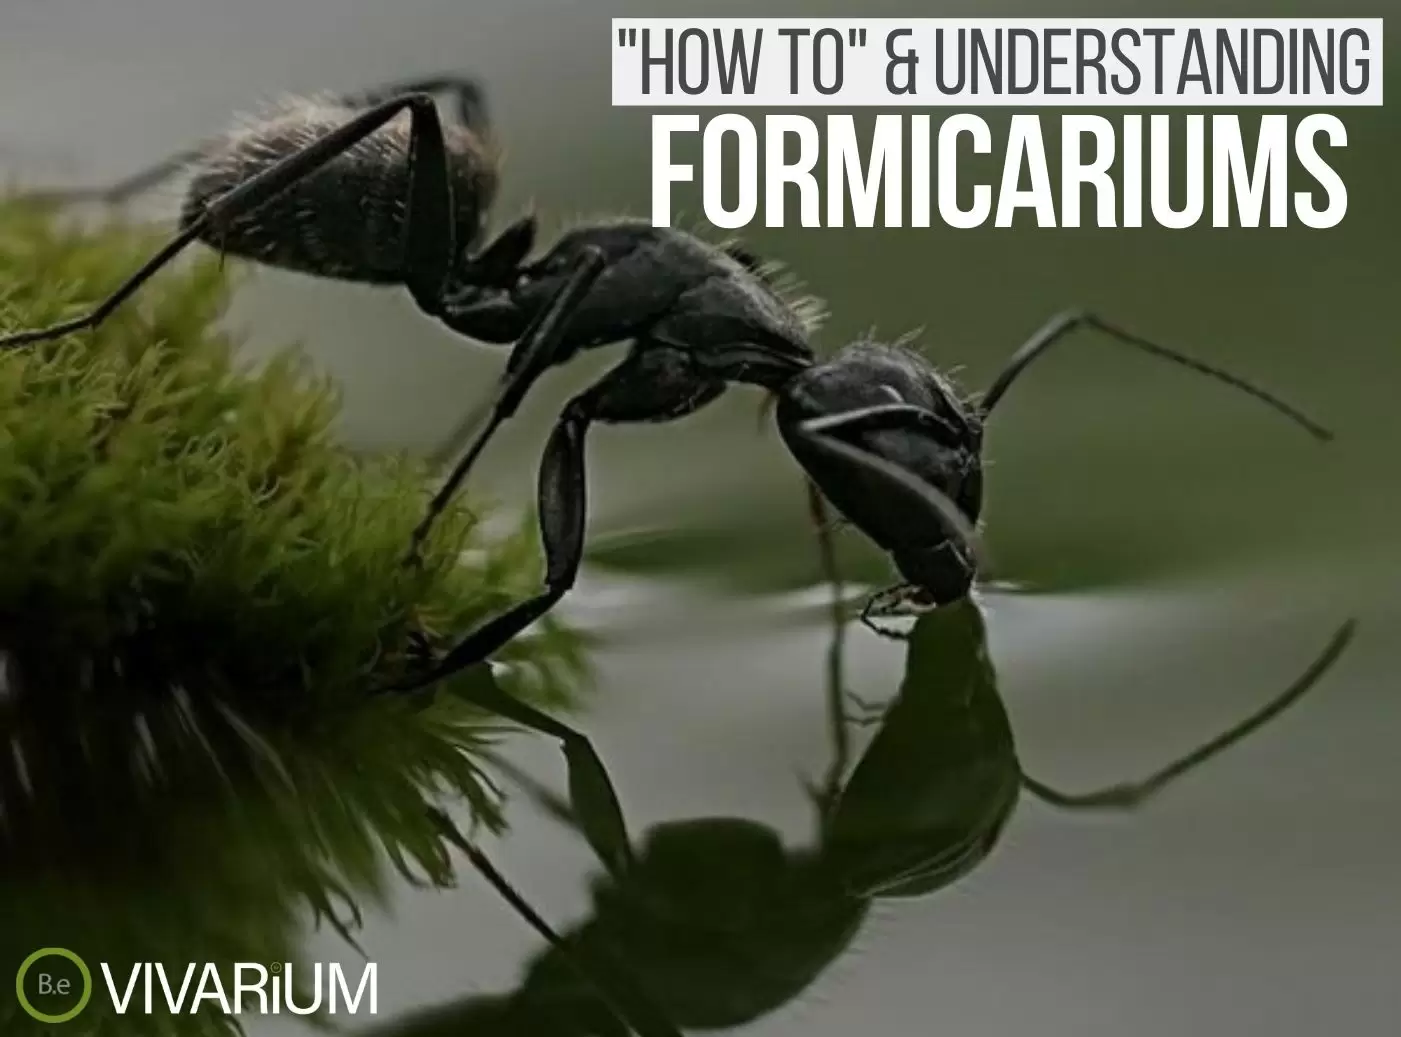 Formicariums "how to" & care guide tips